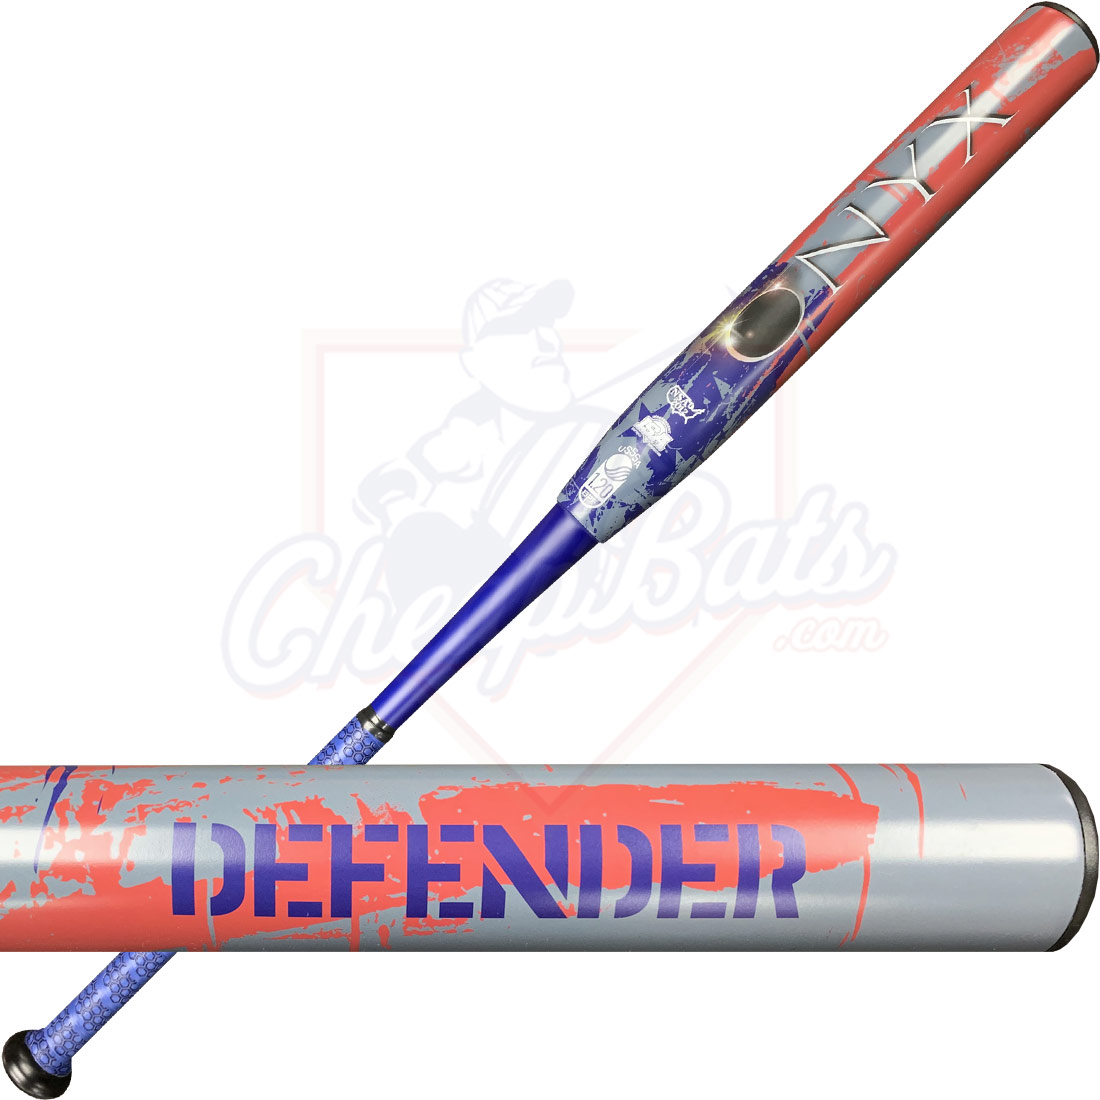 2020 Onyx Defender Slowpitch Softball Bat End Loaded USSSA (Two Piece)